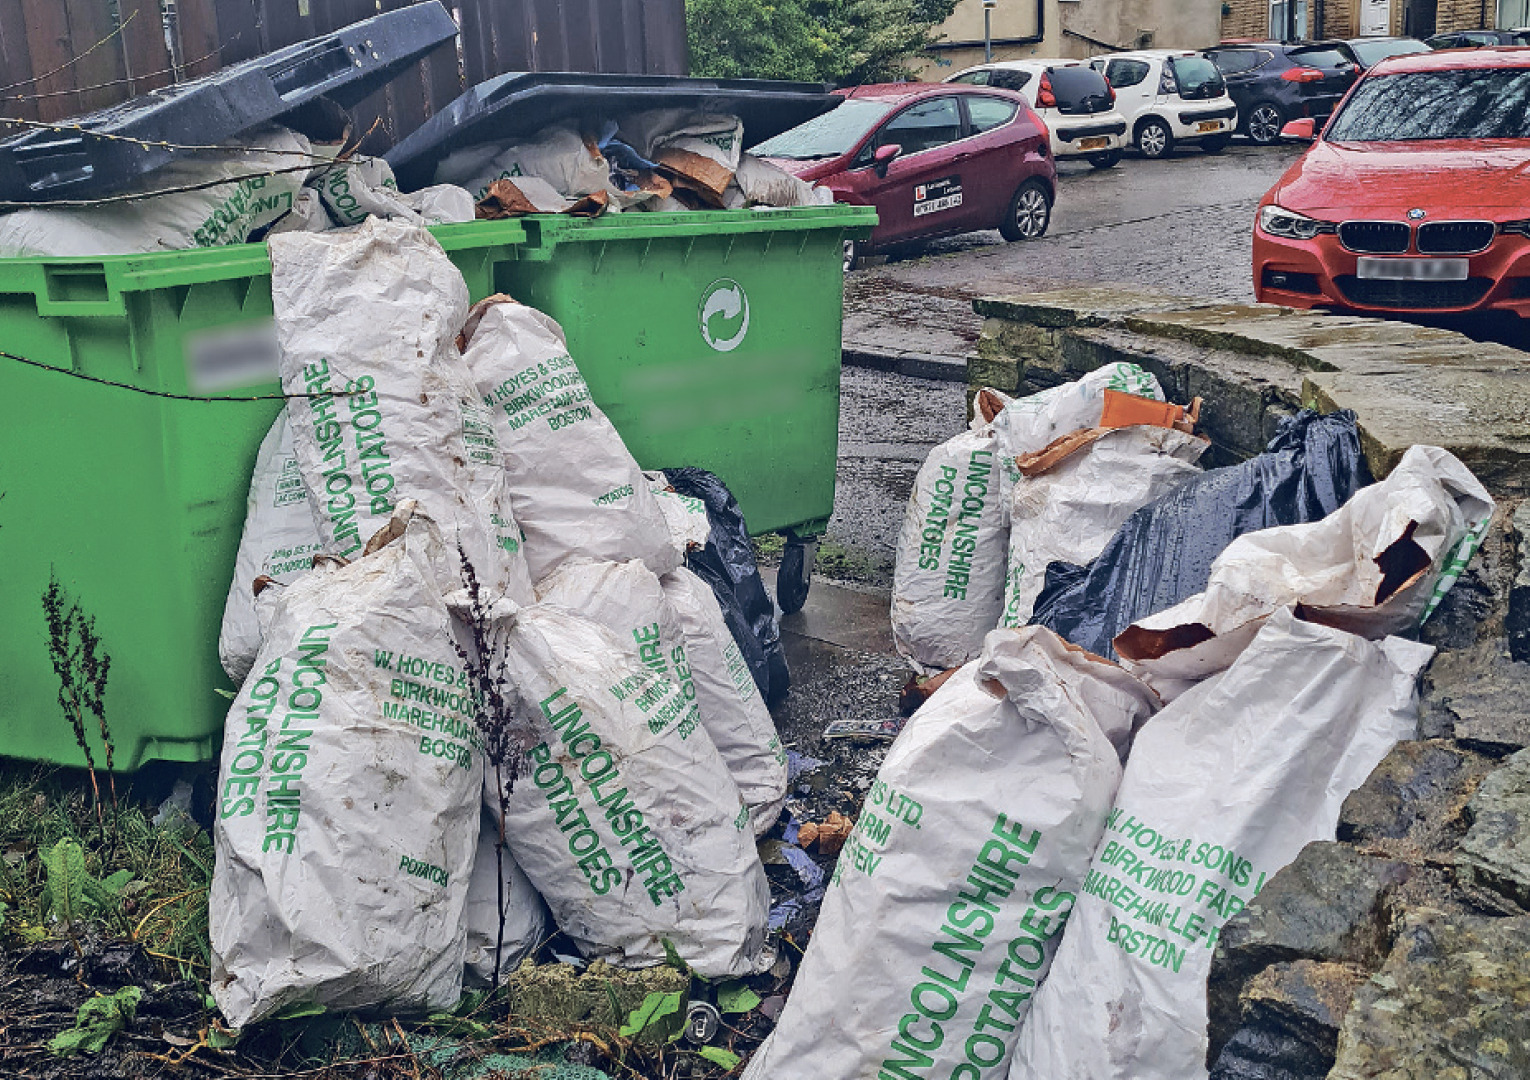 Shop owner wins court victory over waste broker CheaperWaste